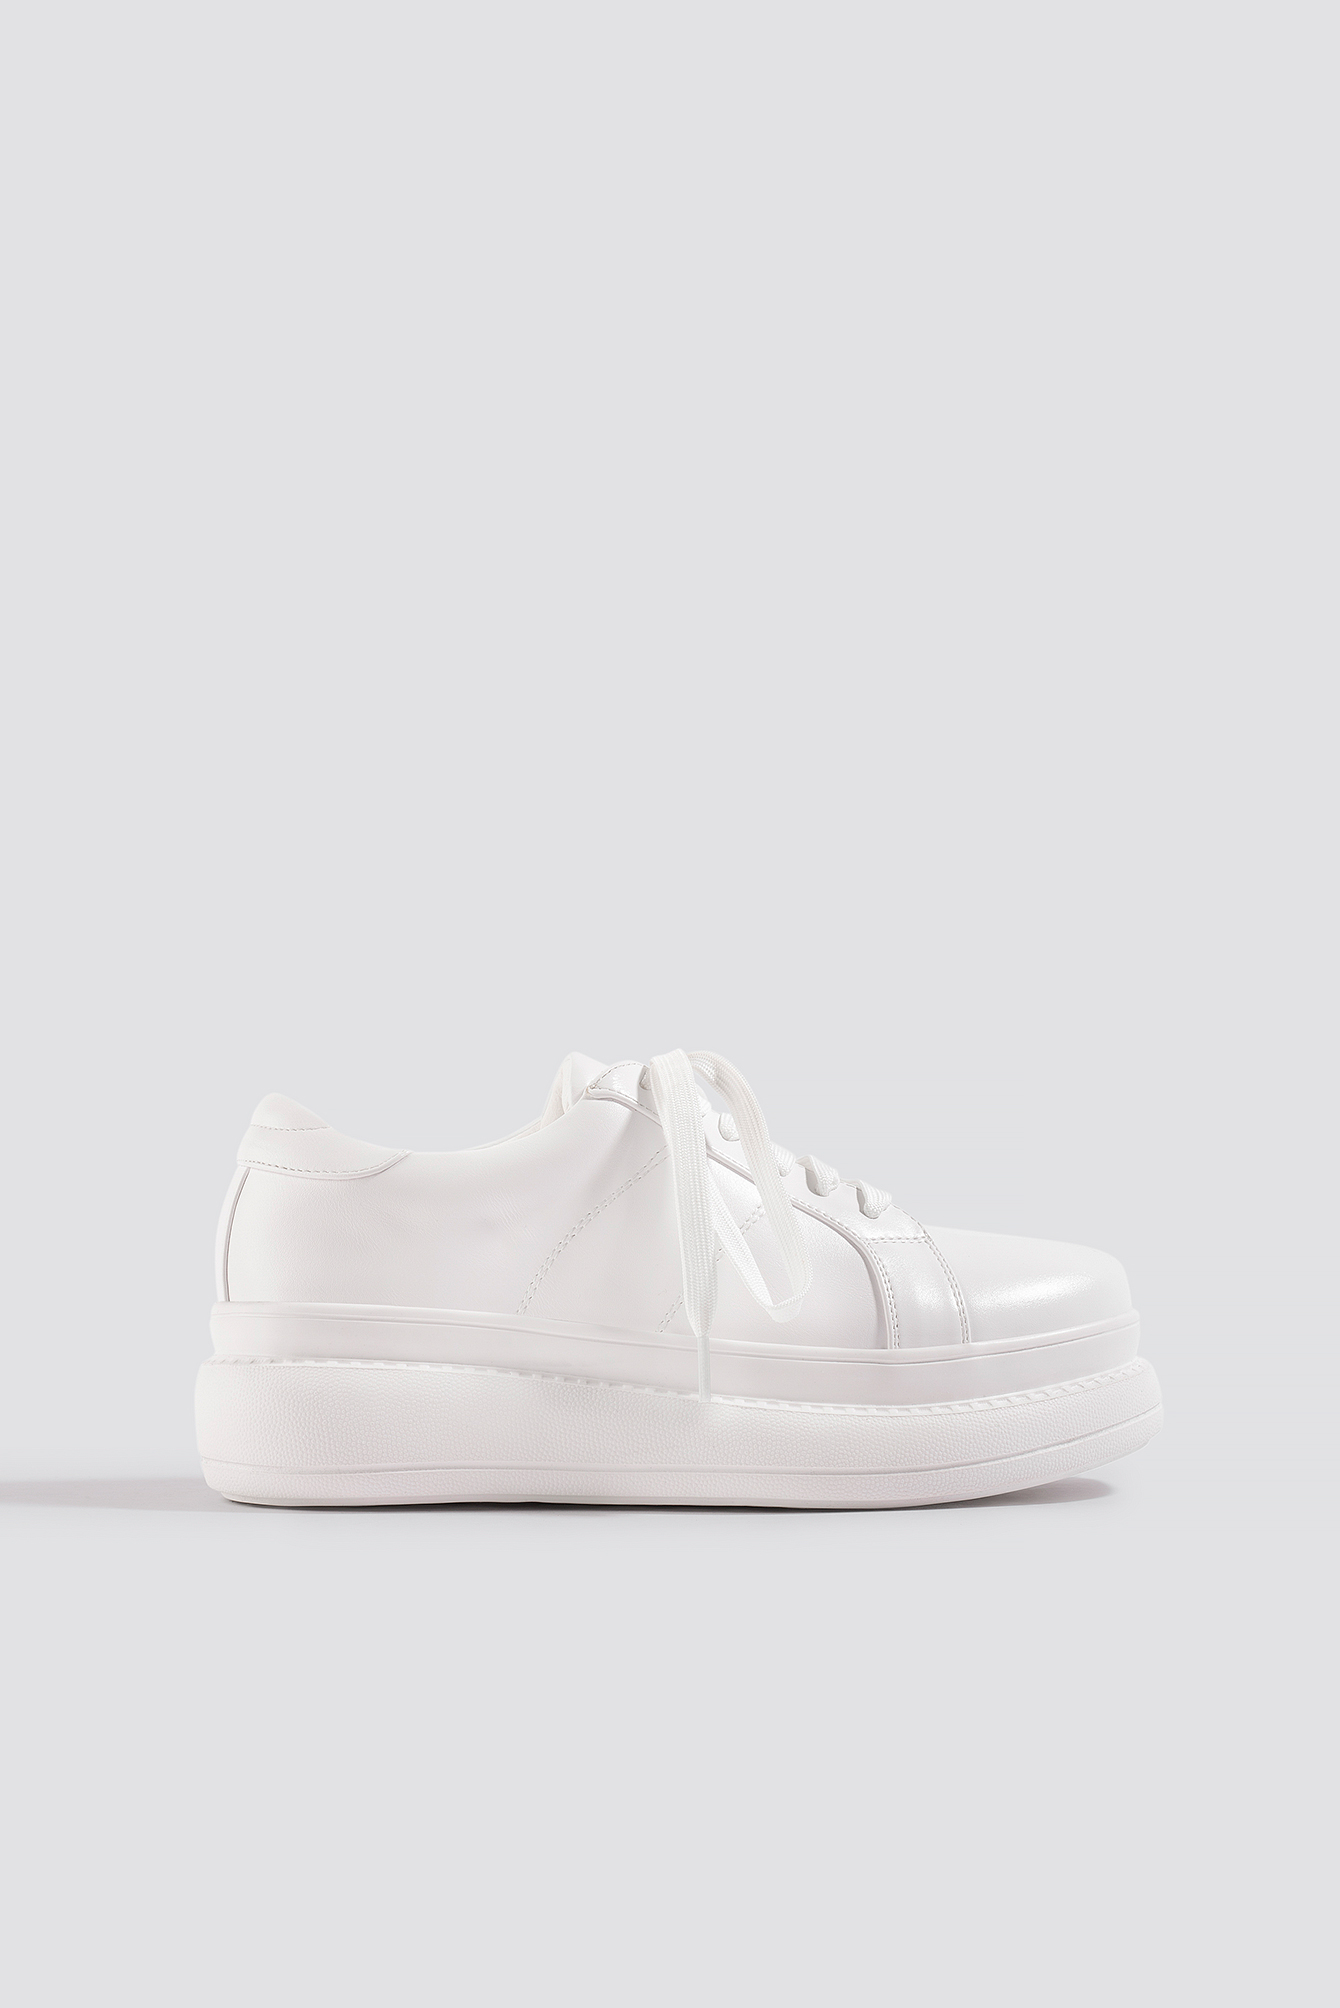 white high sole sneakers